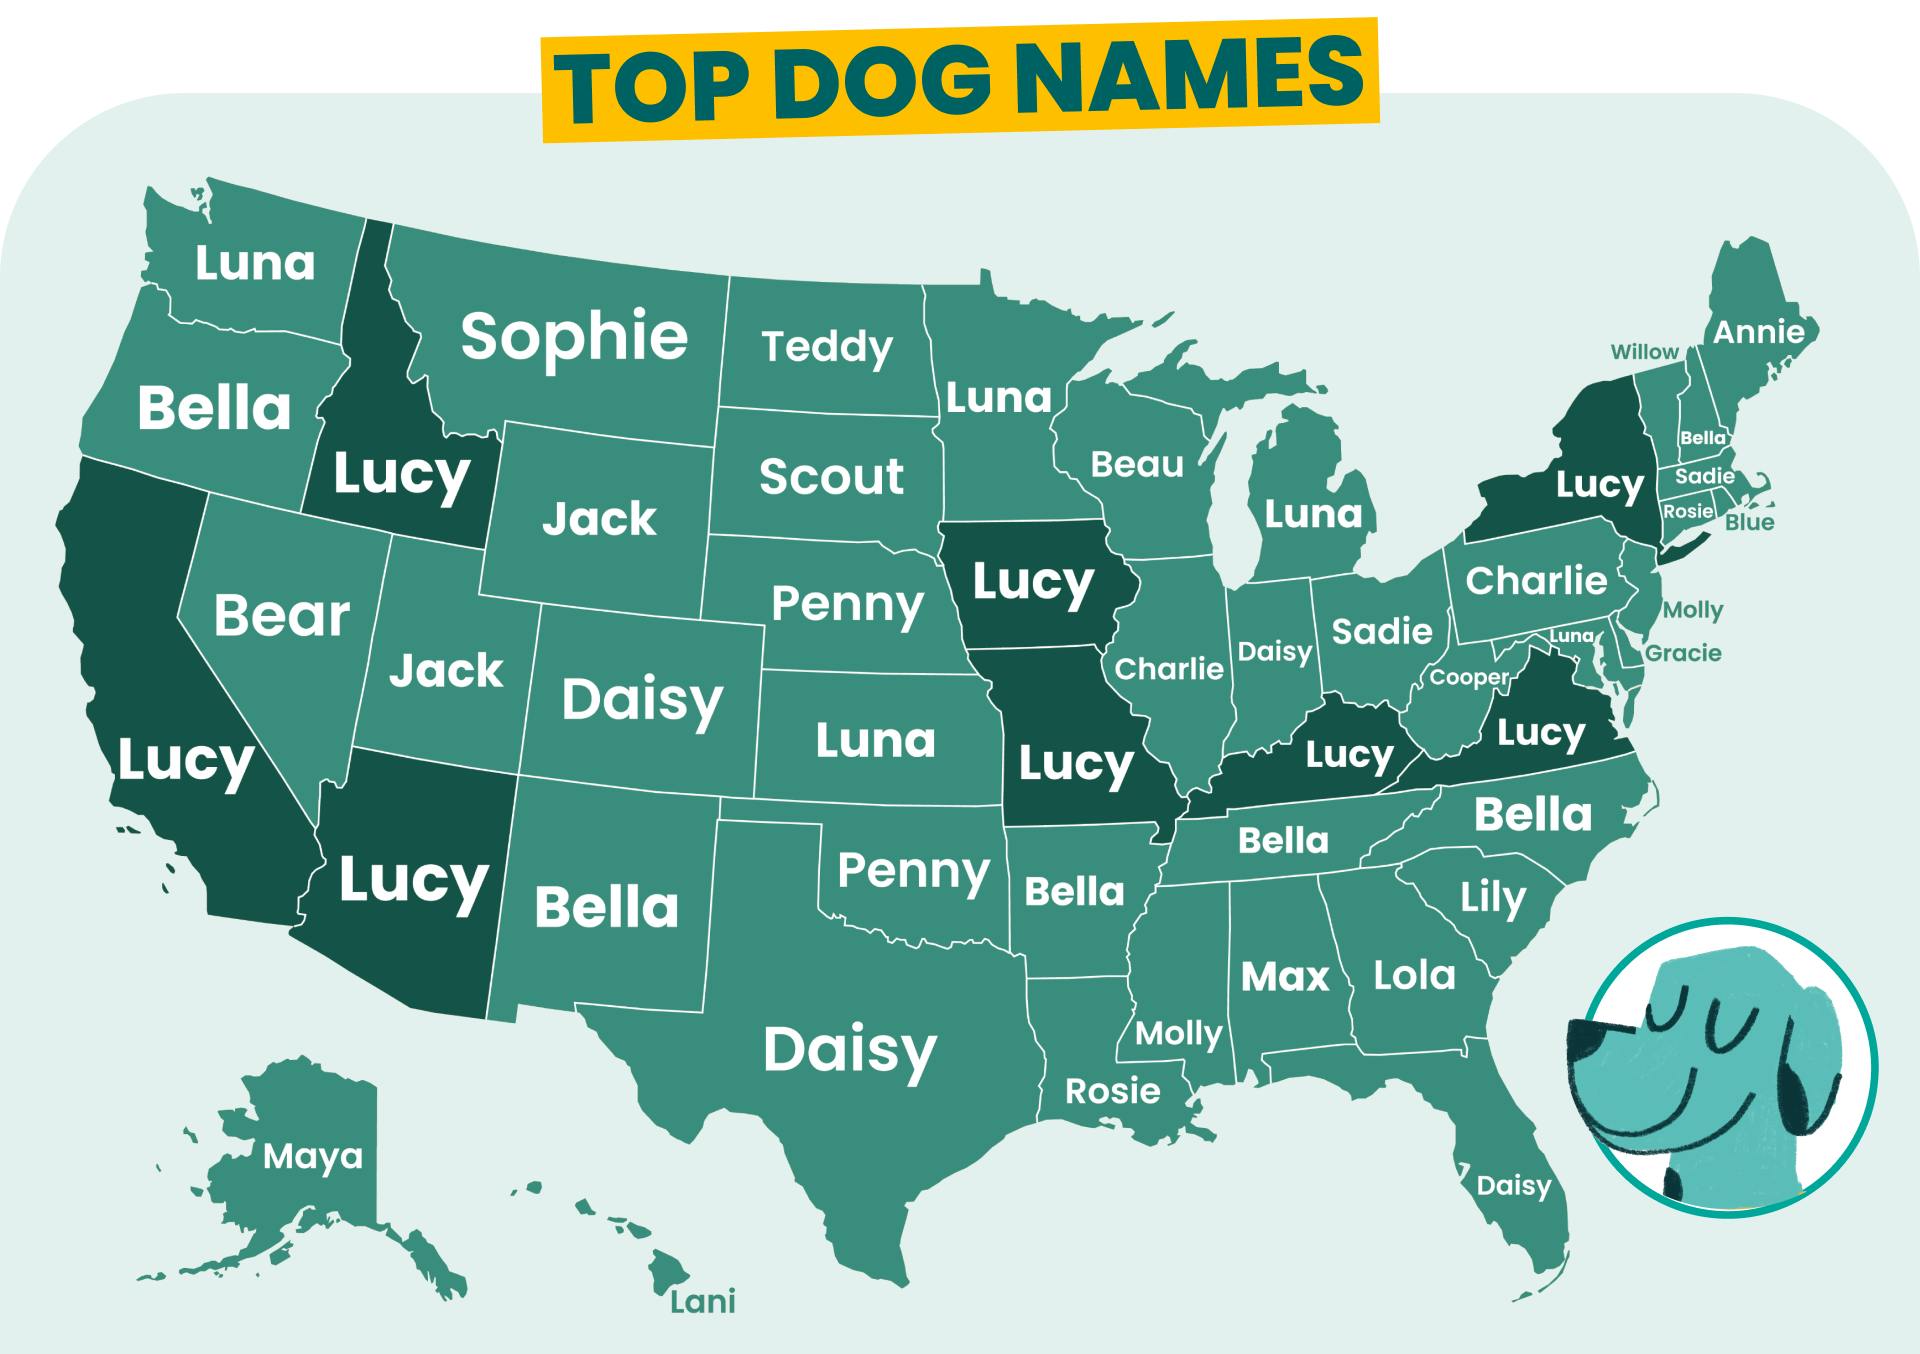 Top dog names by US state